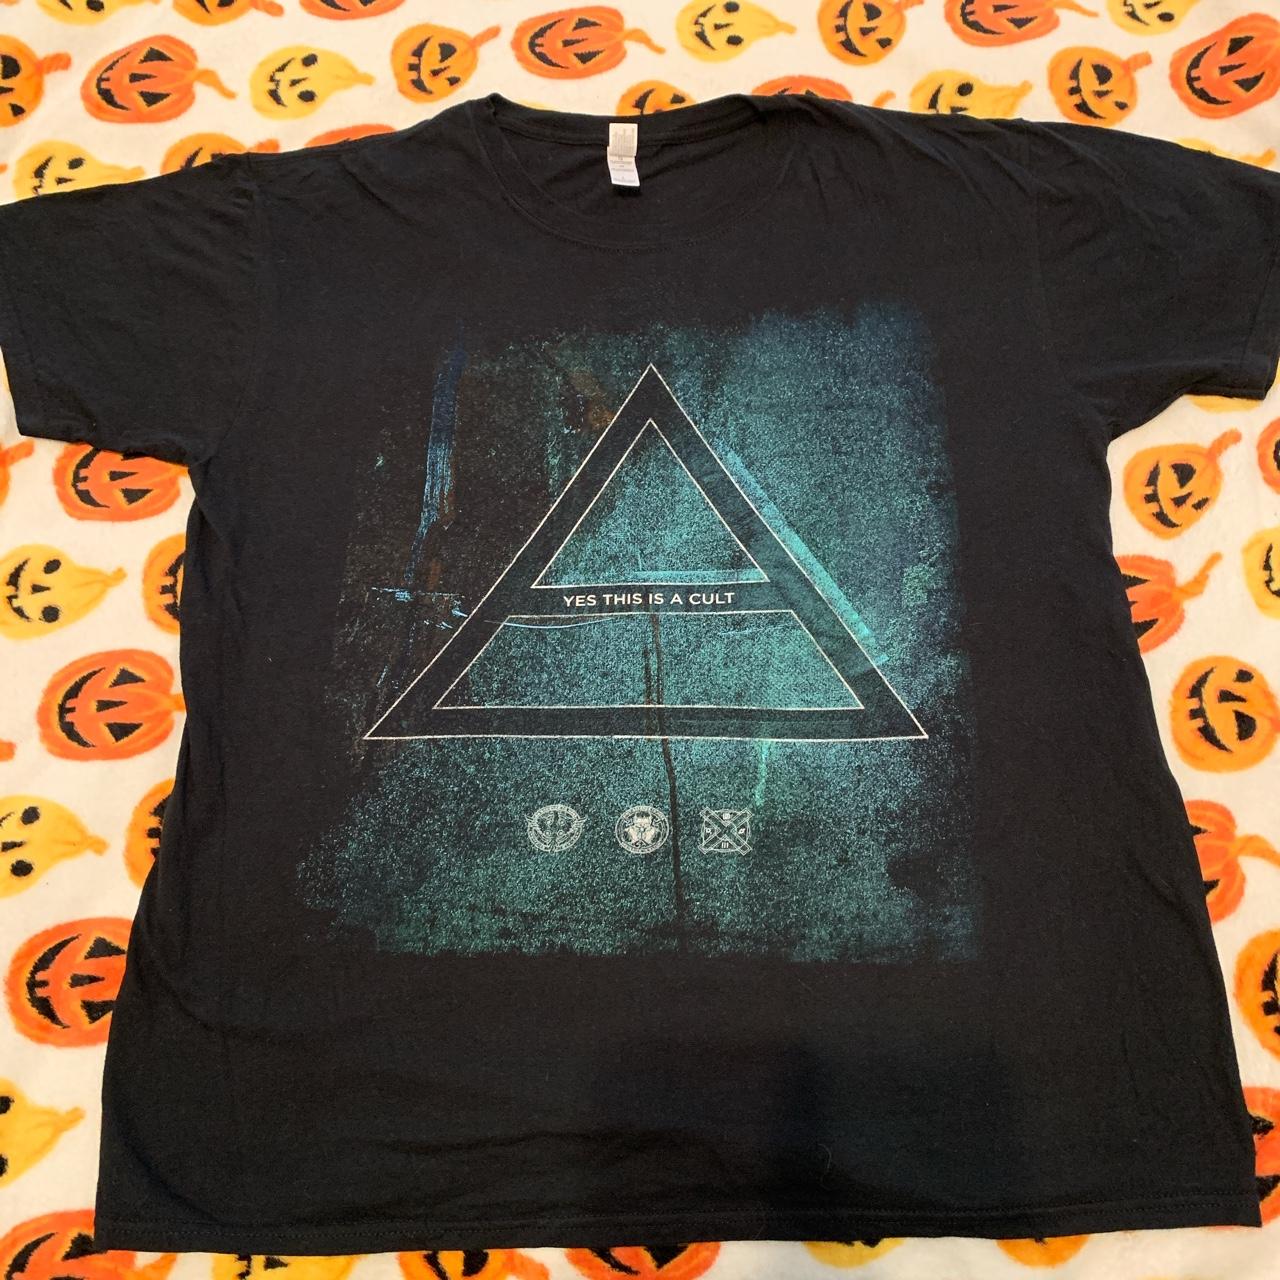 30 Seconds To Mars T-Shirts for Sale